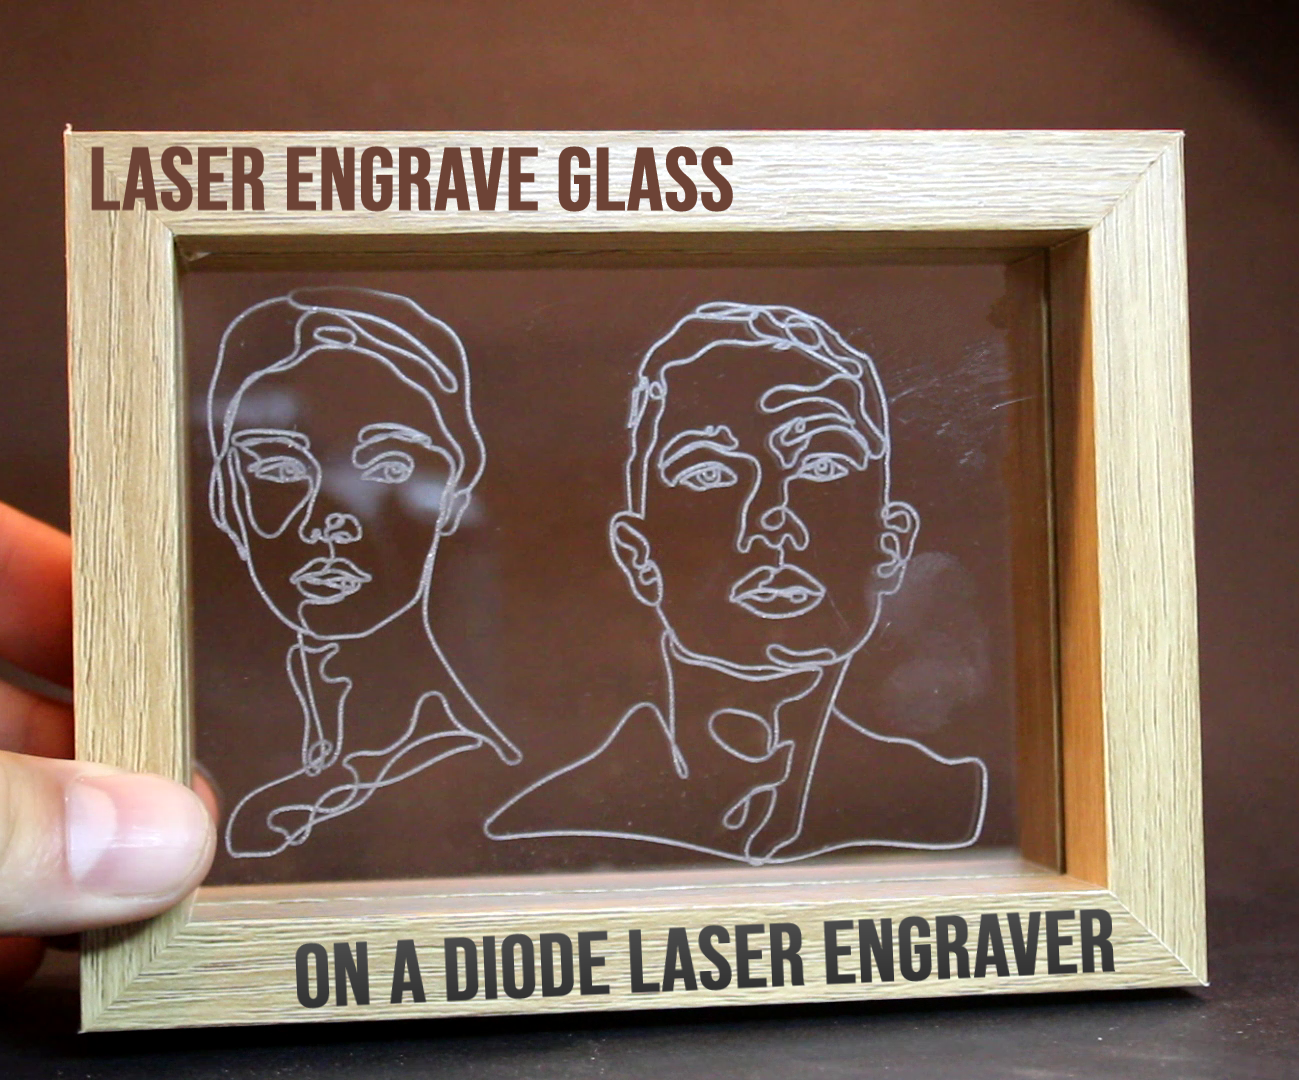 How To Engrave Glass (Diode Laser Engraver)